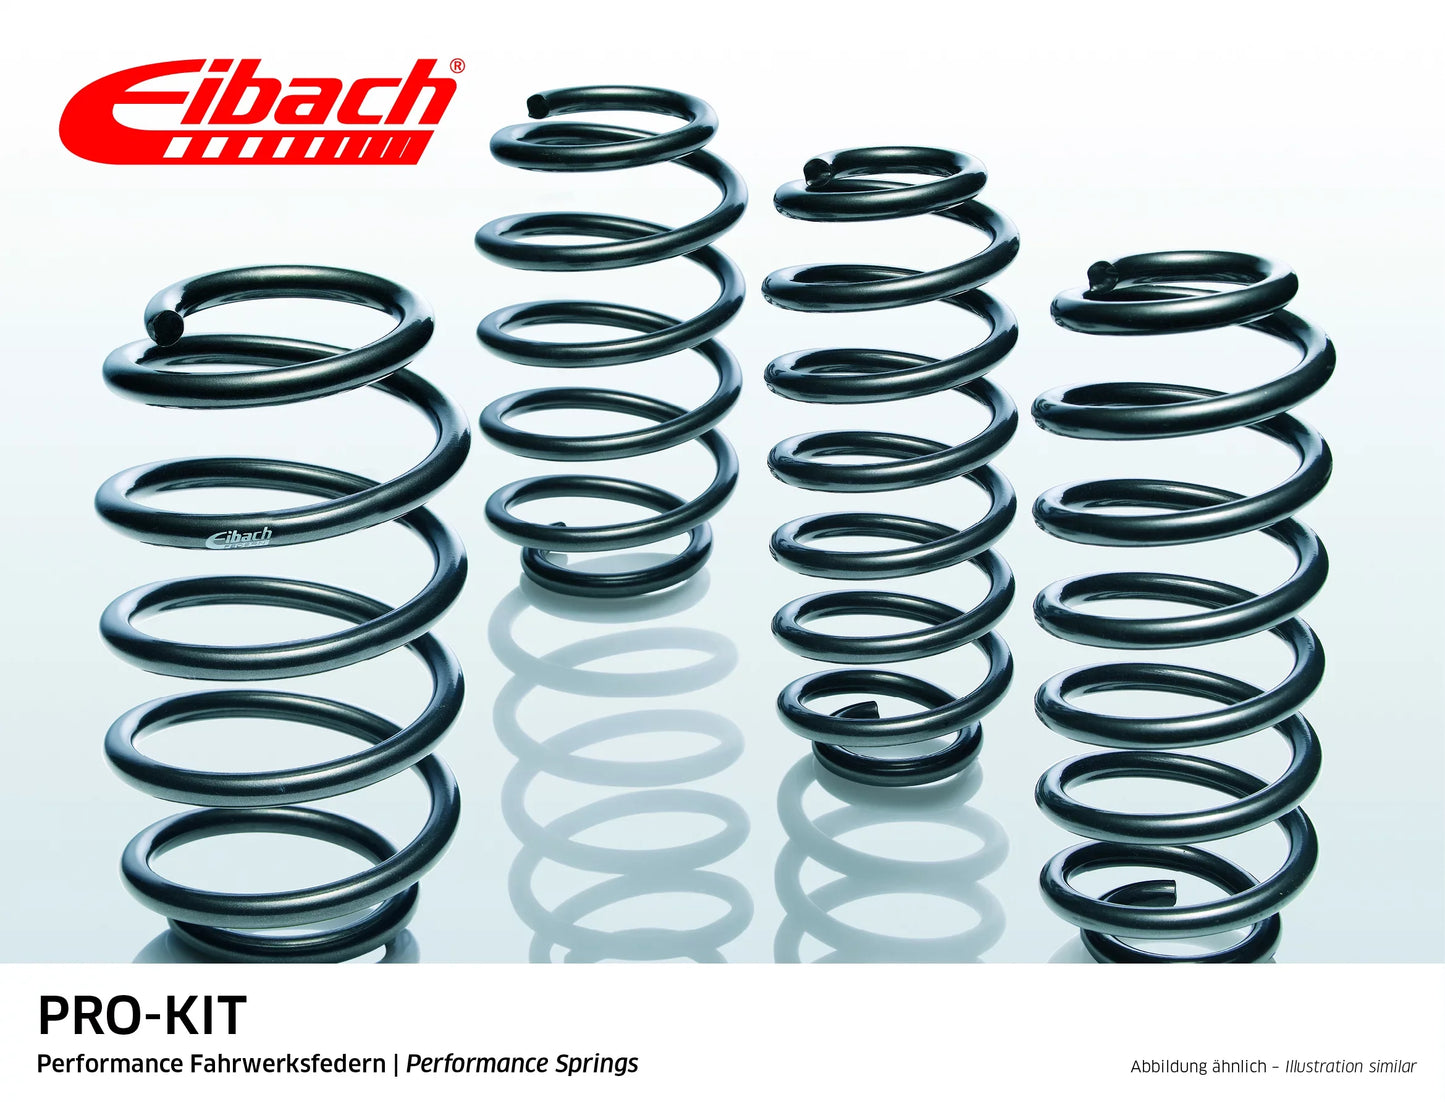 Eibach Pro-Kit Lowering Springs (E7208-140) at £428.84